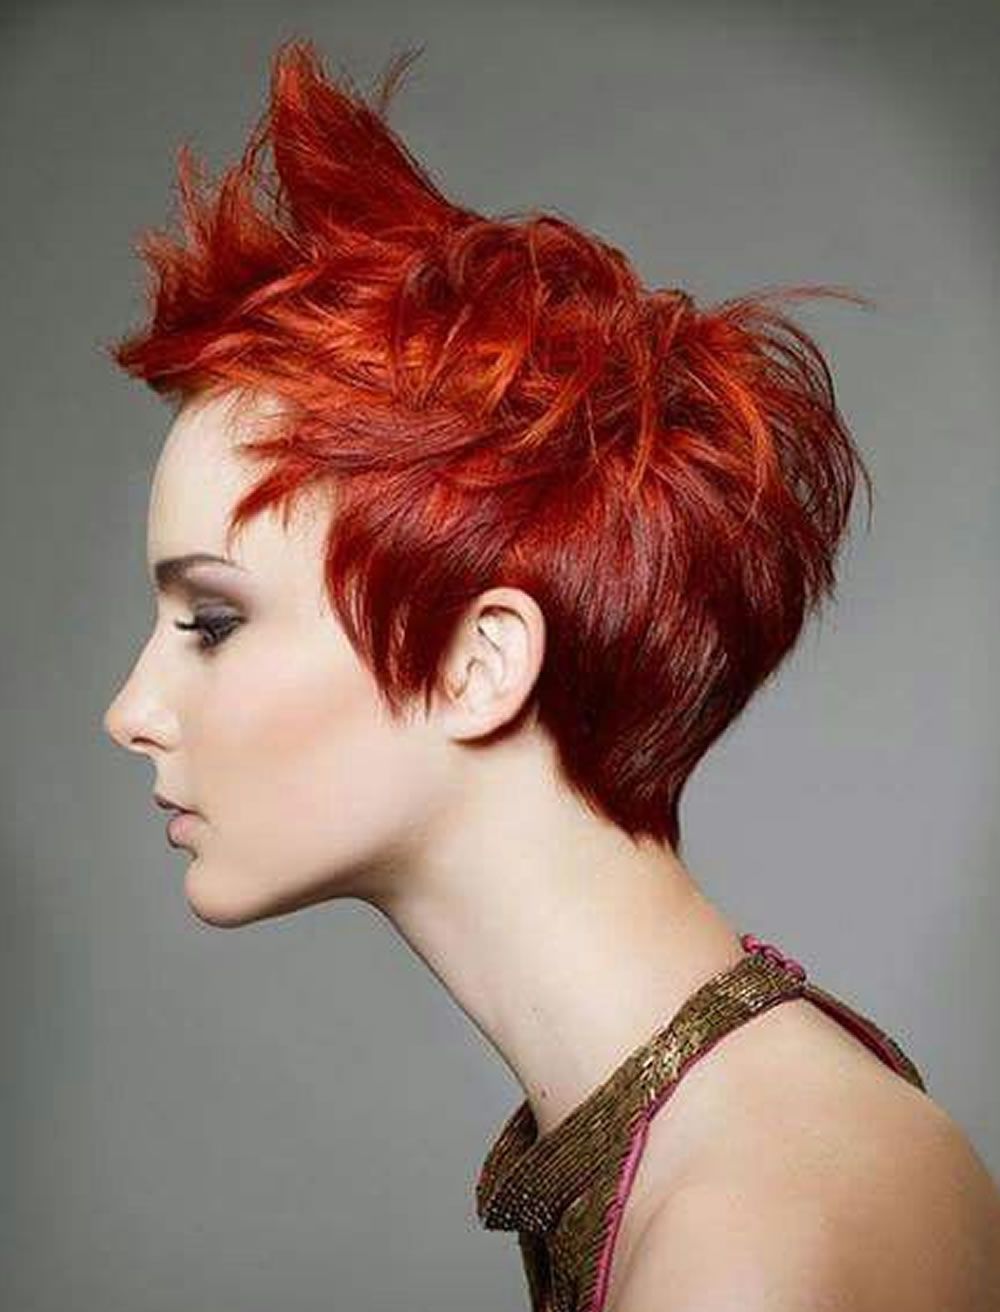 Red Messy Trend Short Hair For Young Girls – Hairstyles In Short Hairstyles For Young Girls (View 19 of 25)